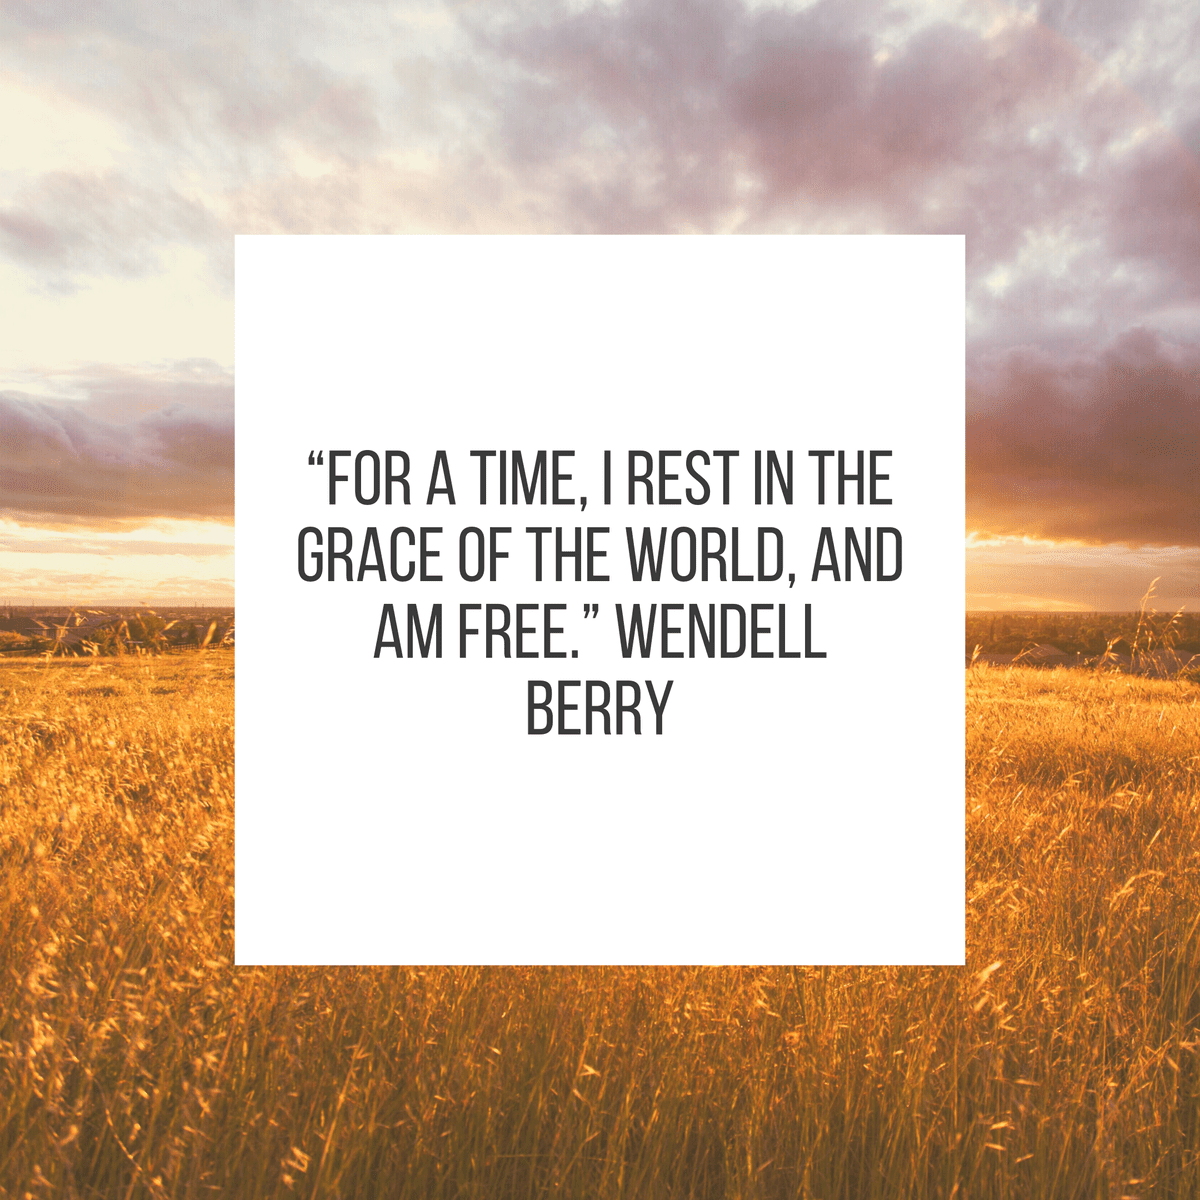 “For a time, I rest in the grace of the world, and am free.” Wendell Berry